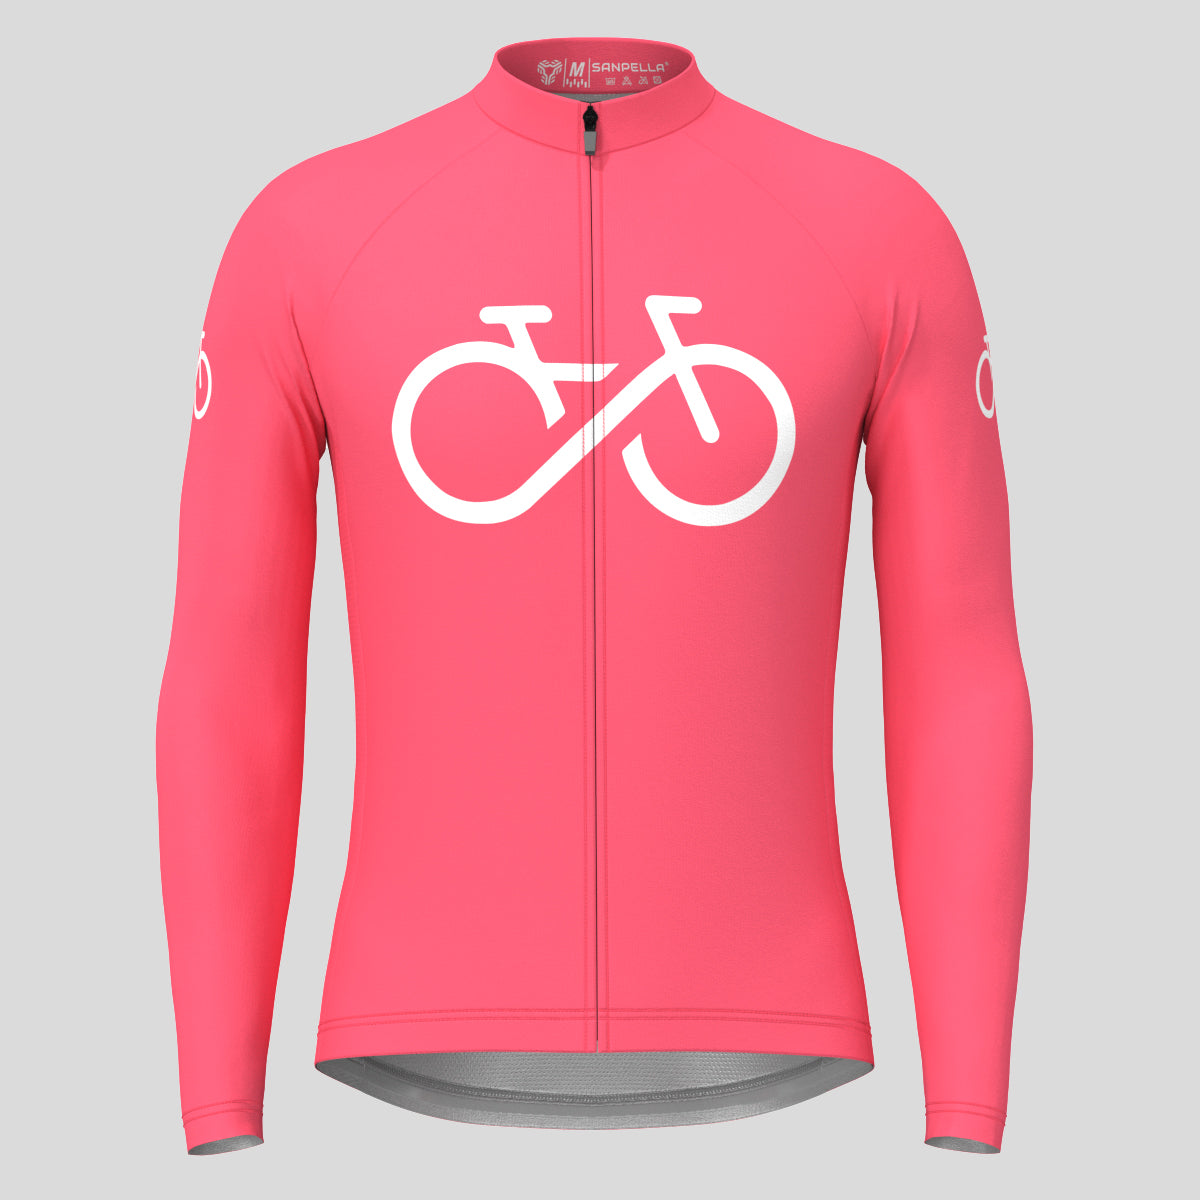 Bike Forever Men's LS Cycling Jersey - Pink